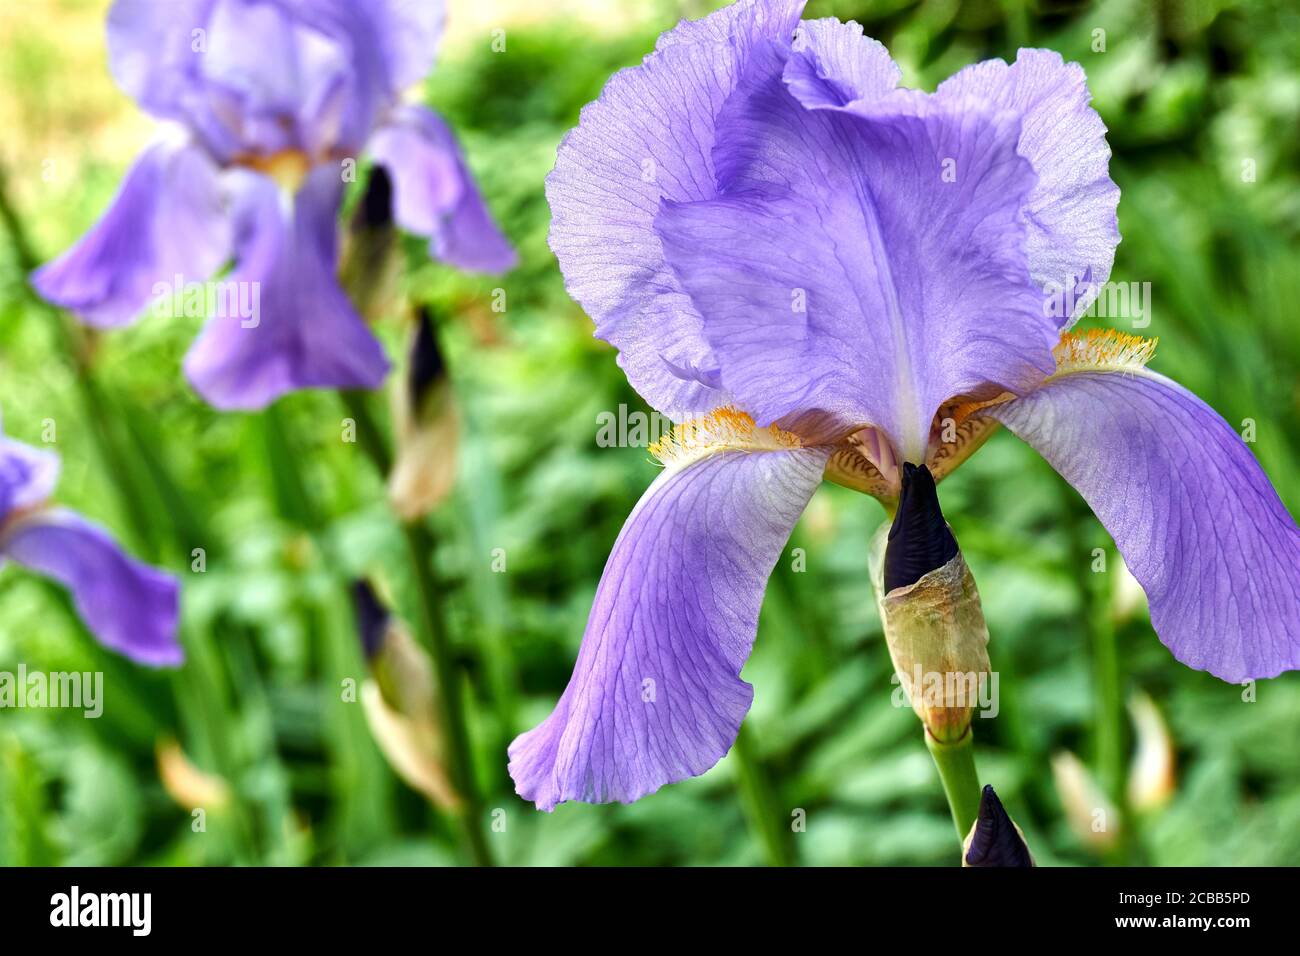 Closeup of purple Irises with yellow hearts blooming in a garden. The Iris is the largest genus of the Iridaceae family with up to 300 species. Stock Photo